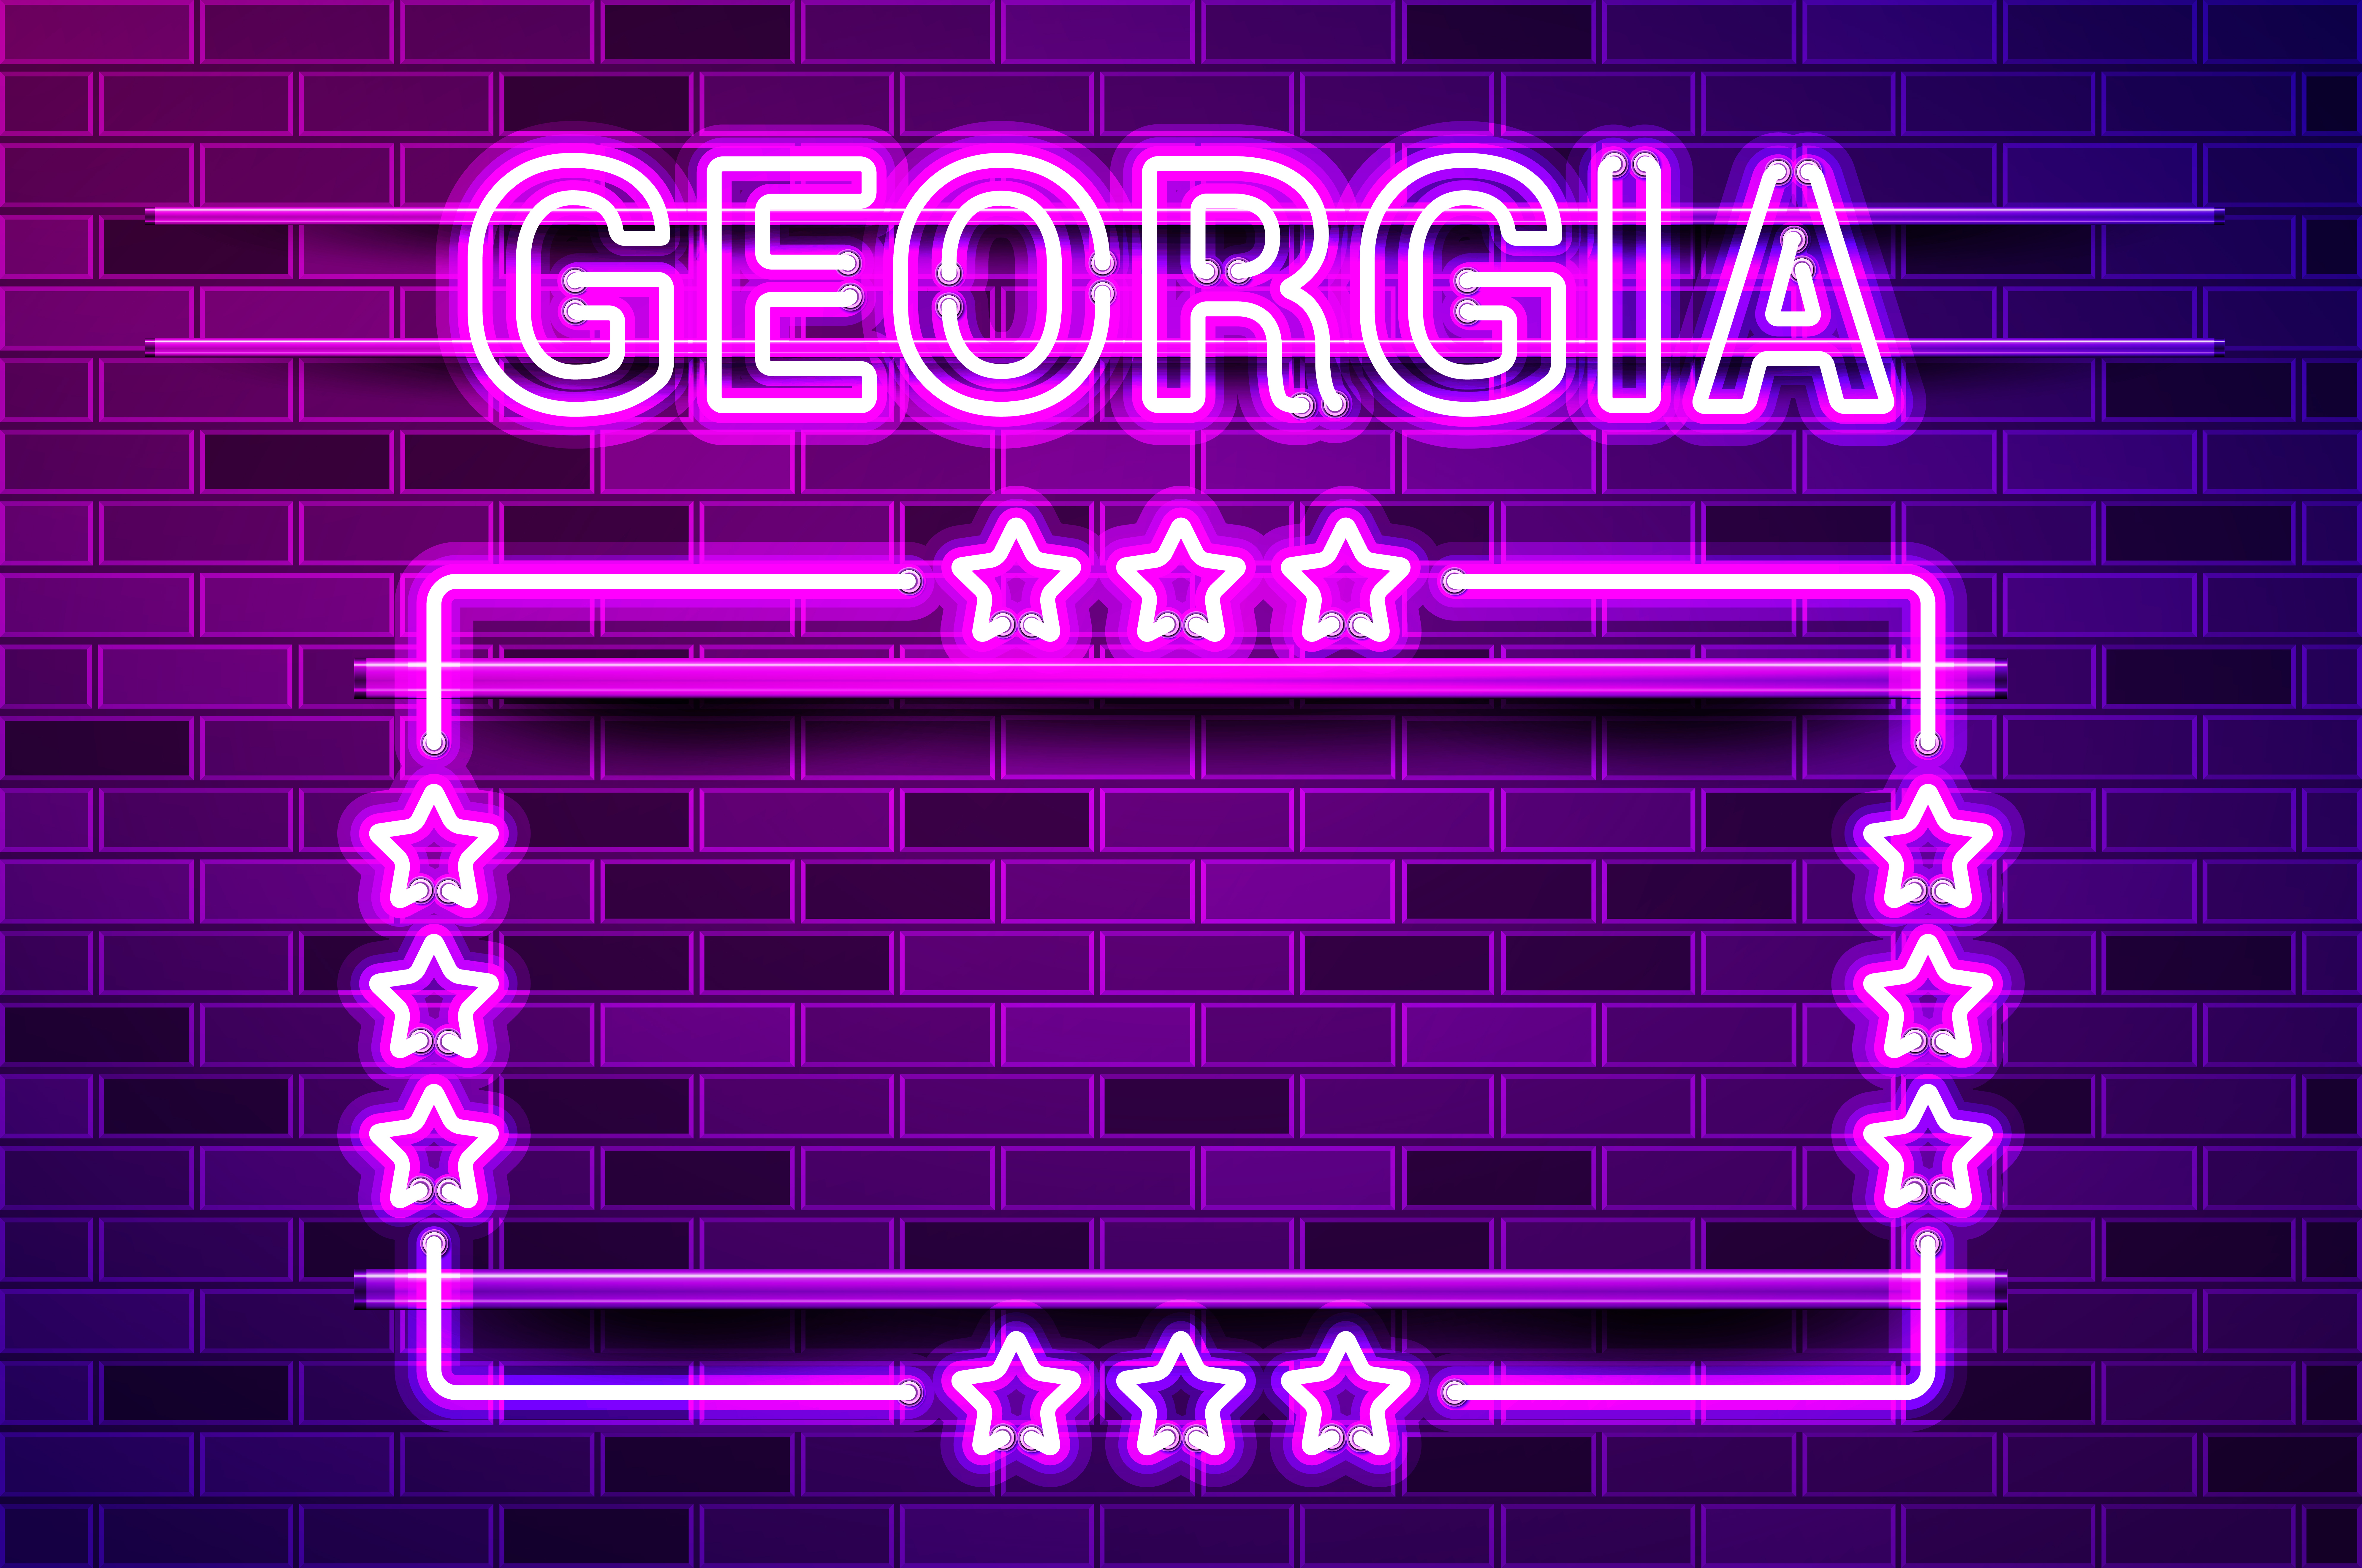 Georgia US State glowing purple neon lettering and a rectangular frame with stars. Realistic vector illustration. Purple brick wall, violet glow, metal holders.. Georgia US State glowing purple neon lettering and a rectangular frame with stars